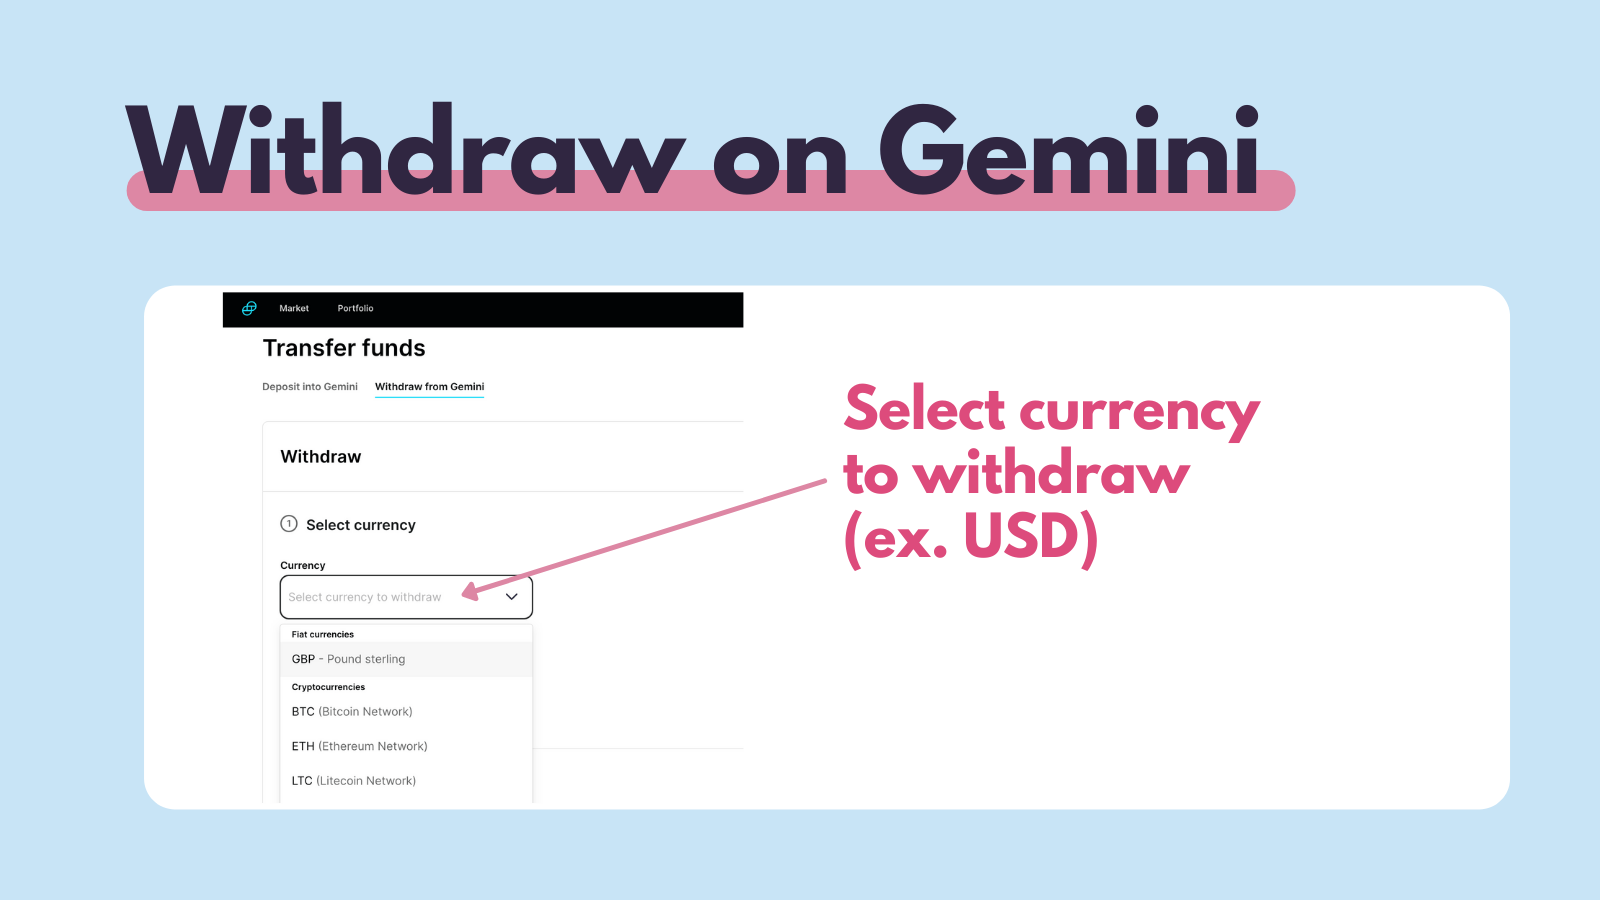 select currency to withdraw